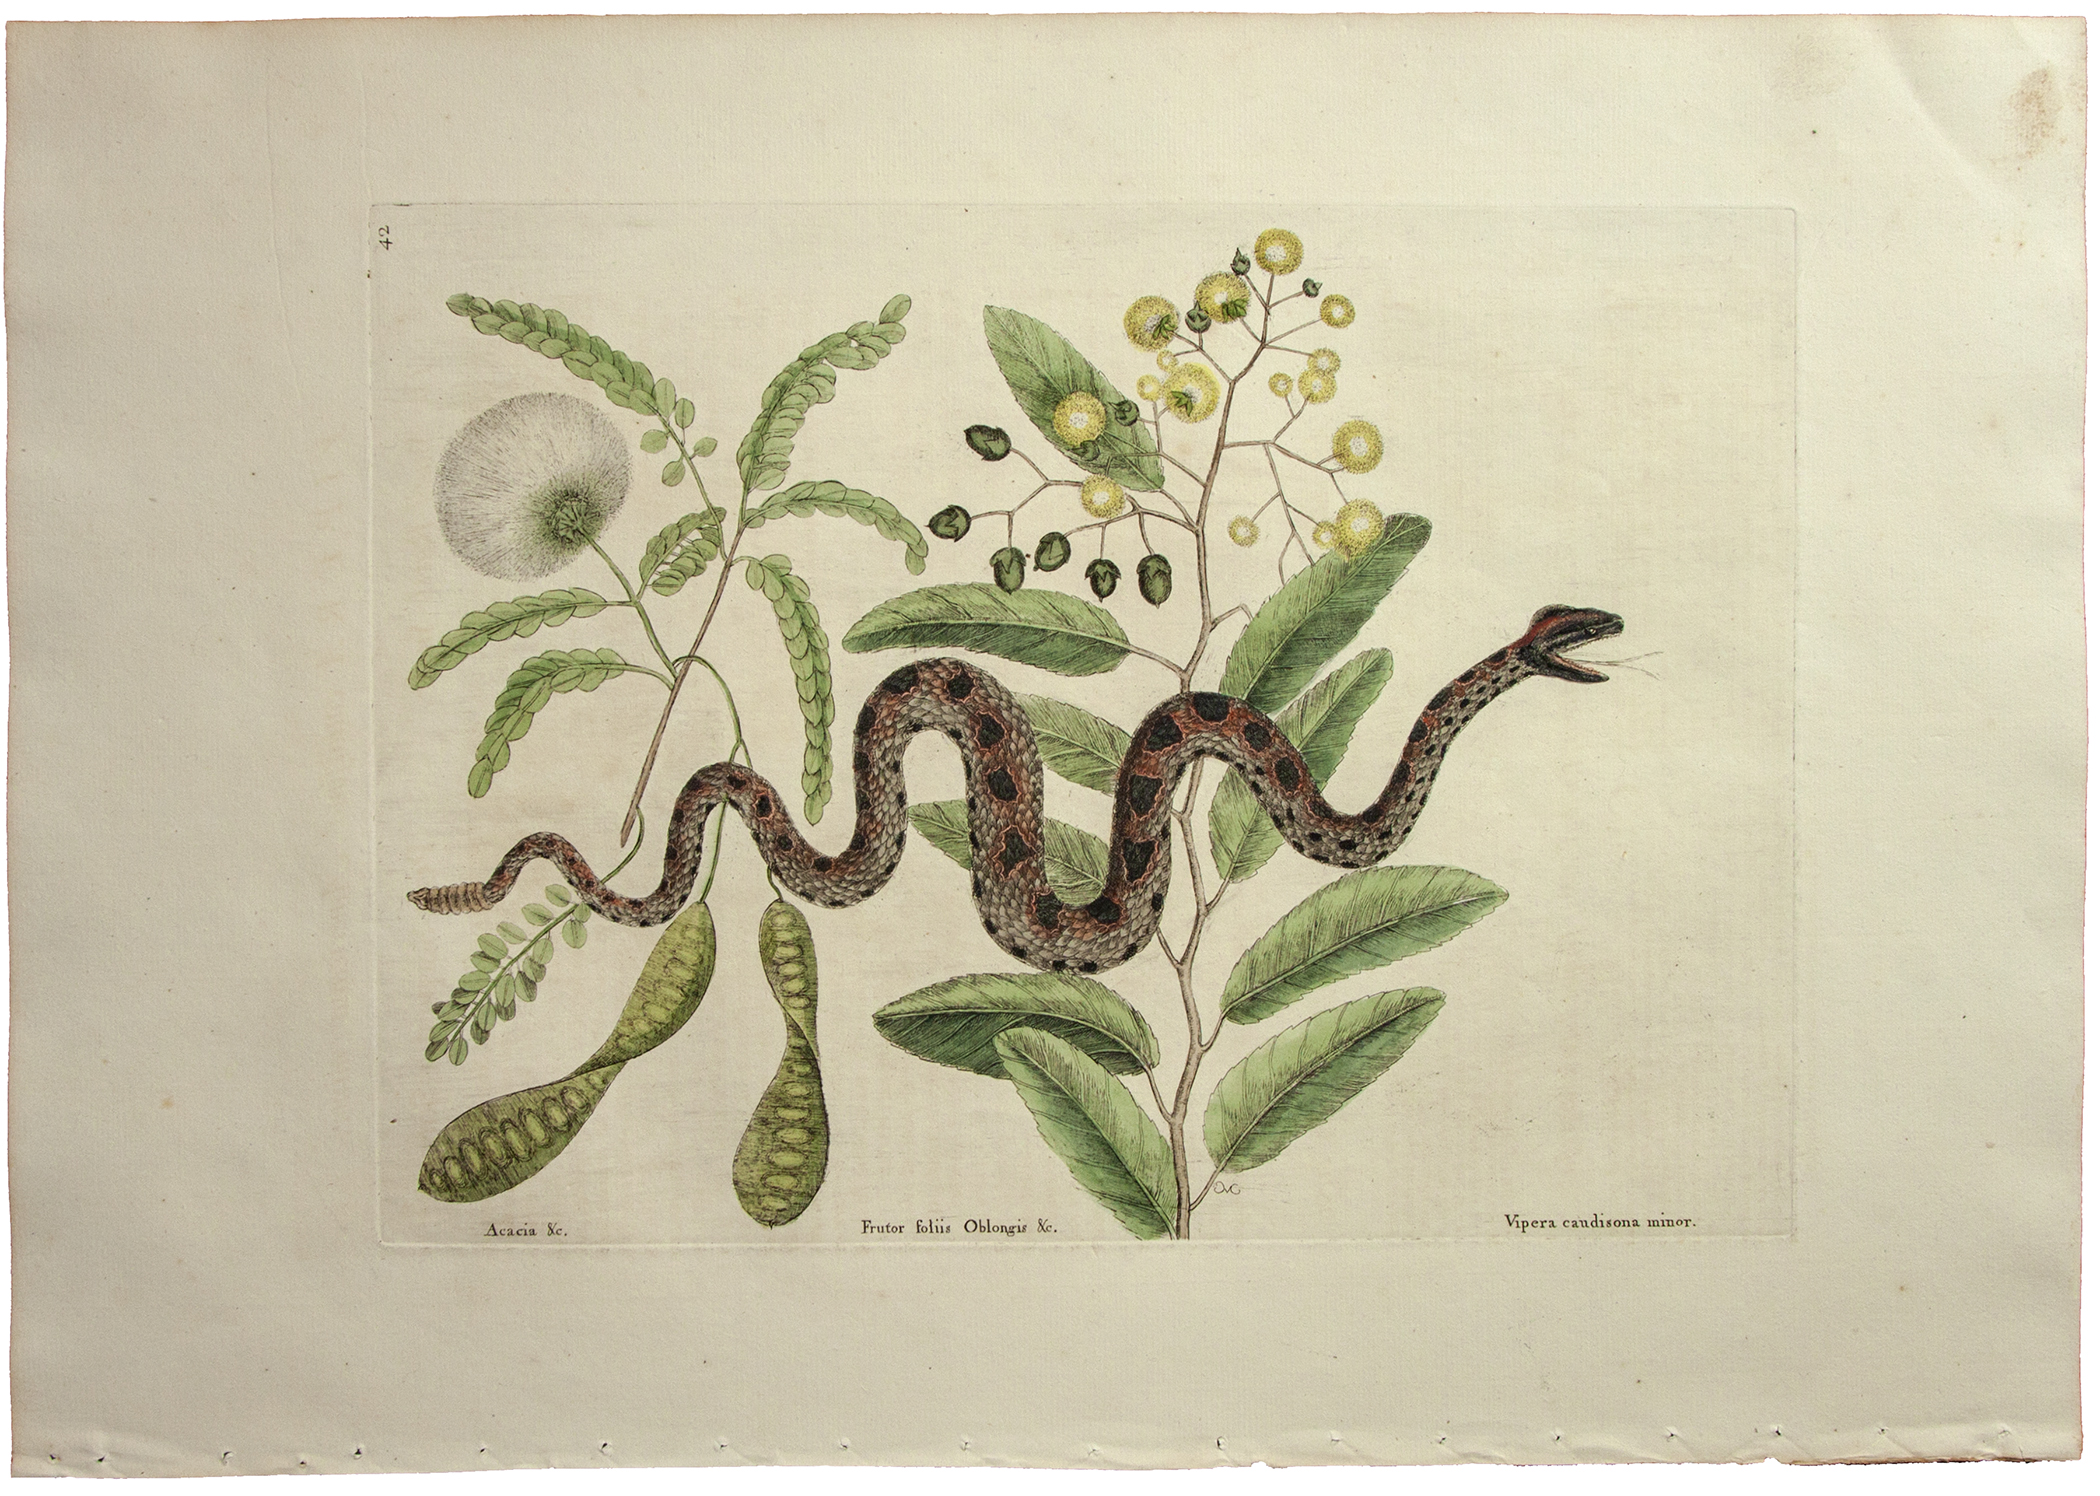 Small Rattle Snake by Mark Catesby